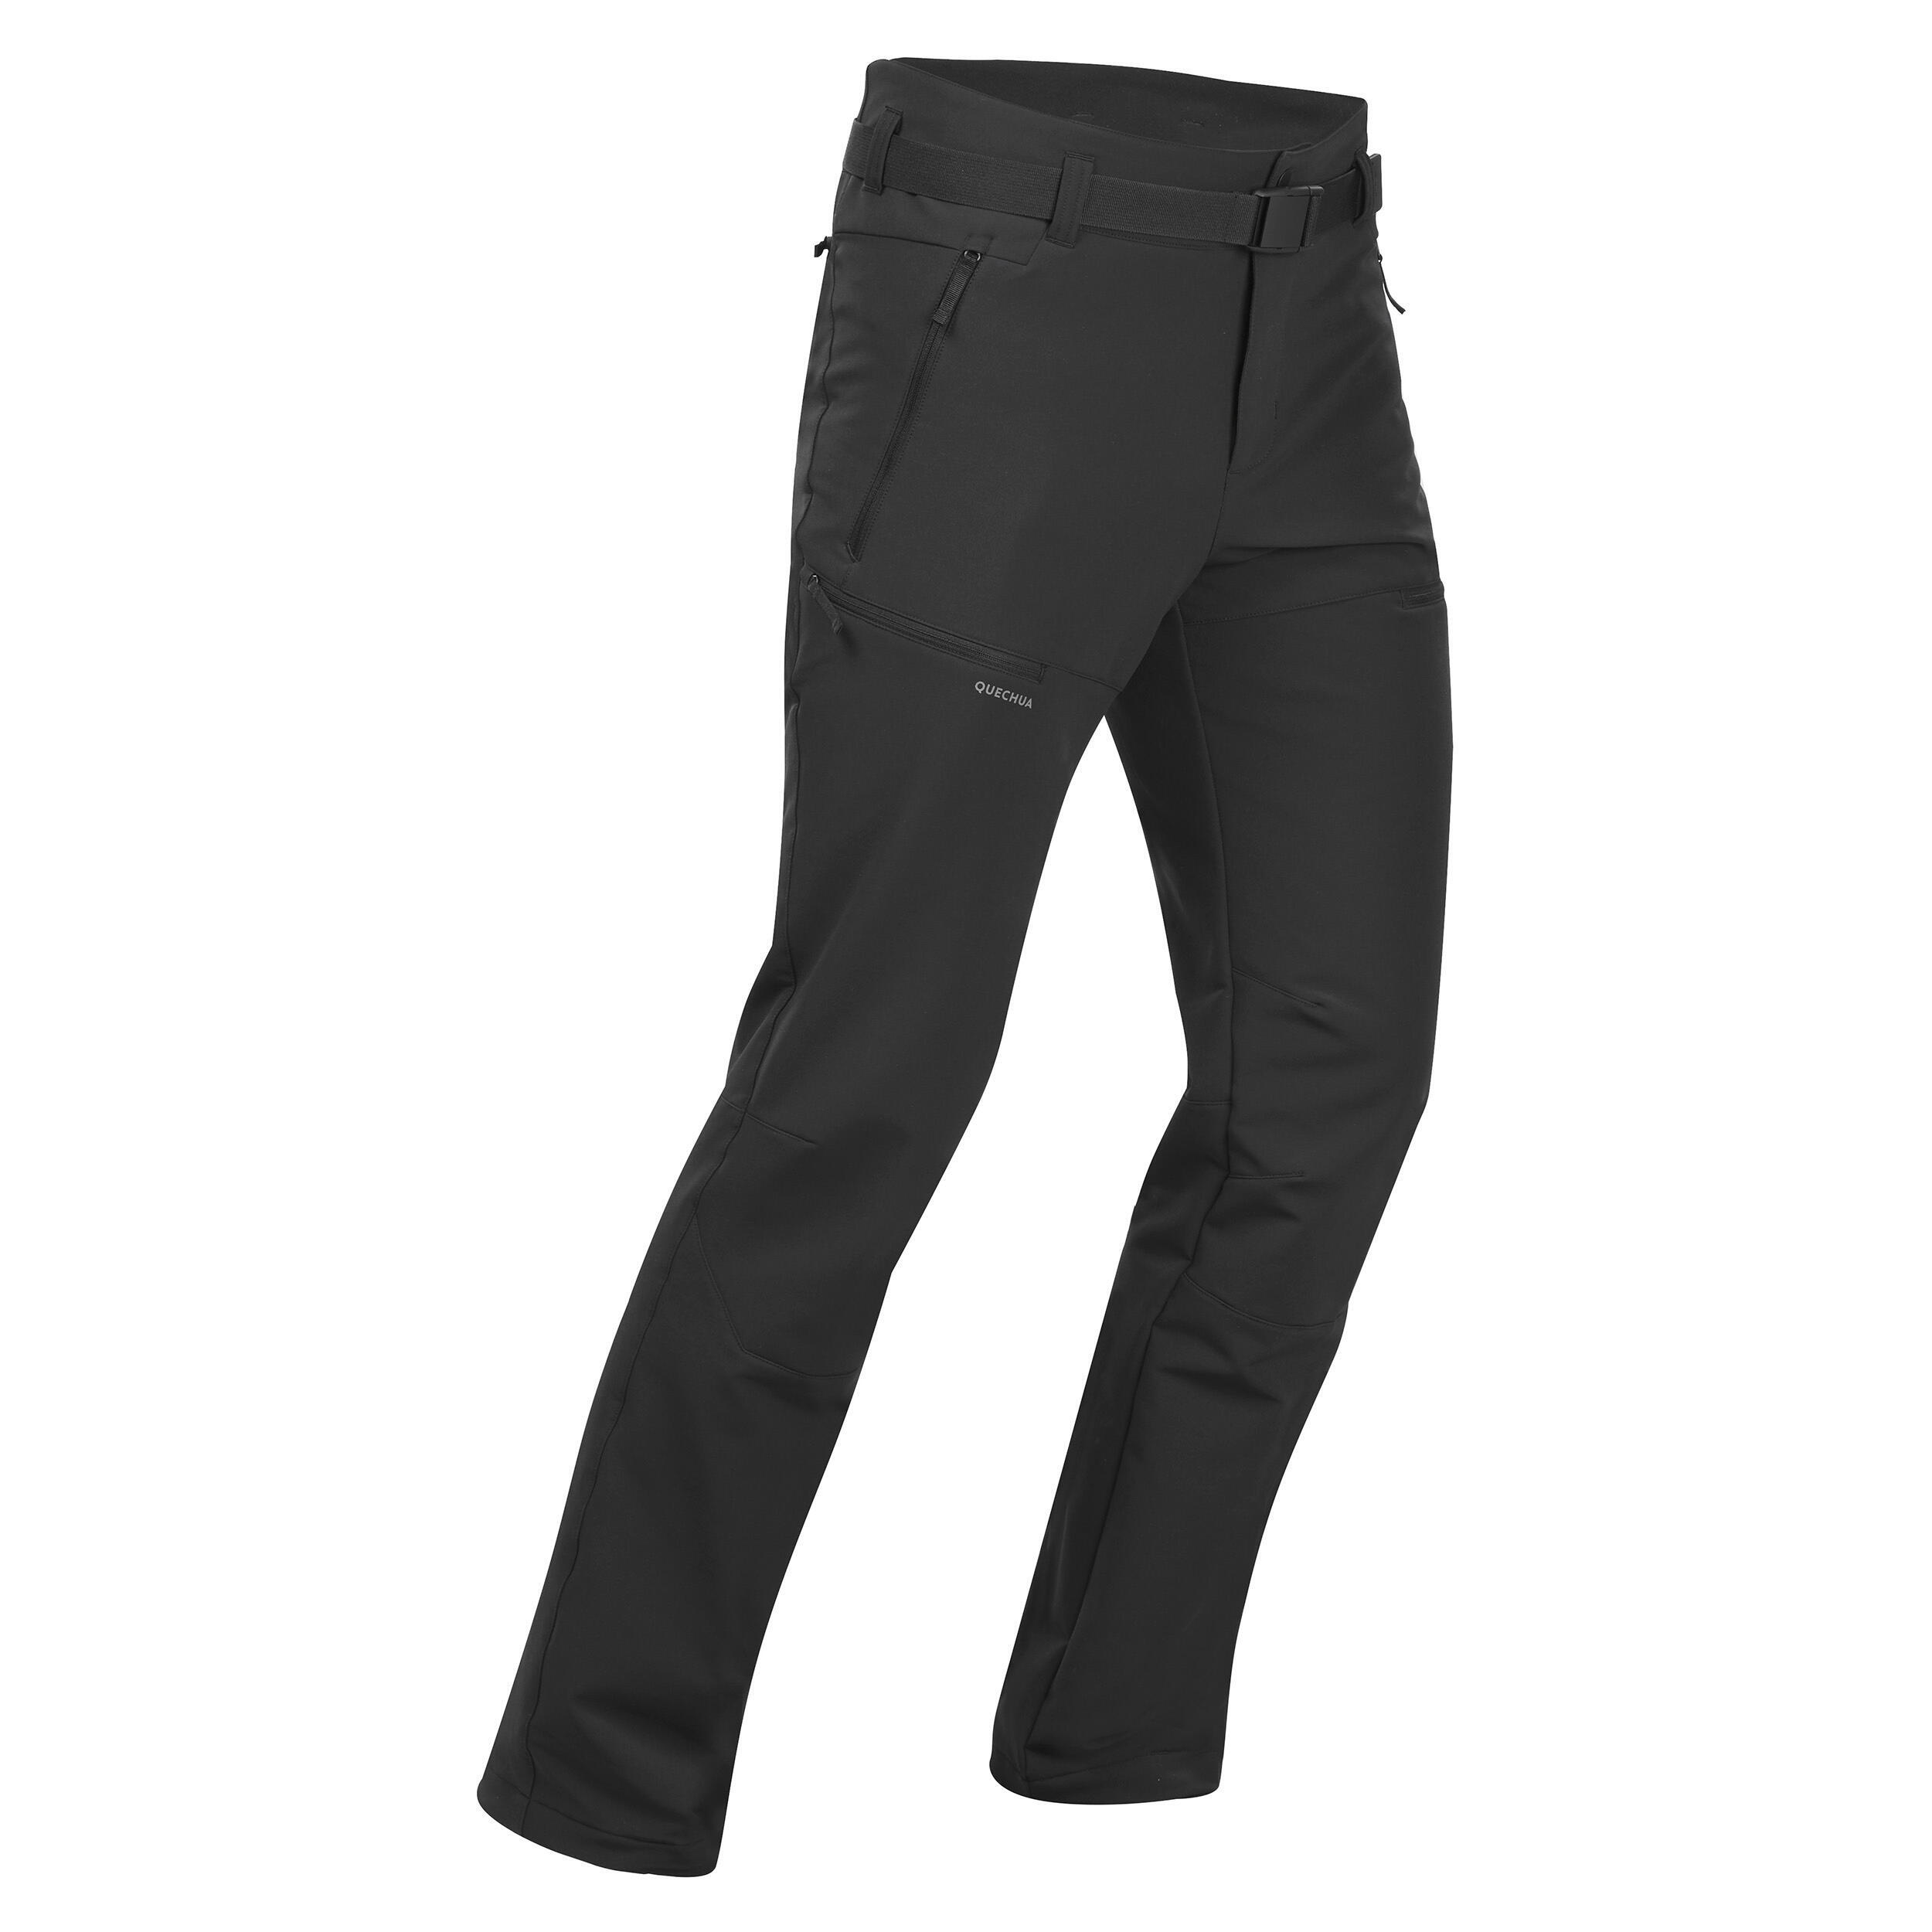 QUECHUA MEN'S WARM WATER-REPELLENT SNOW HIKING TROUSERS - SH500 MOUNTAIN 